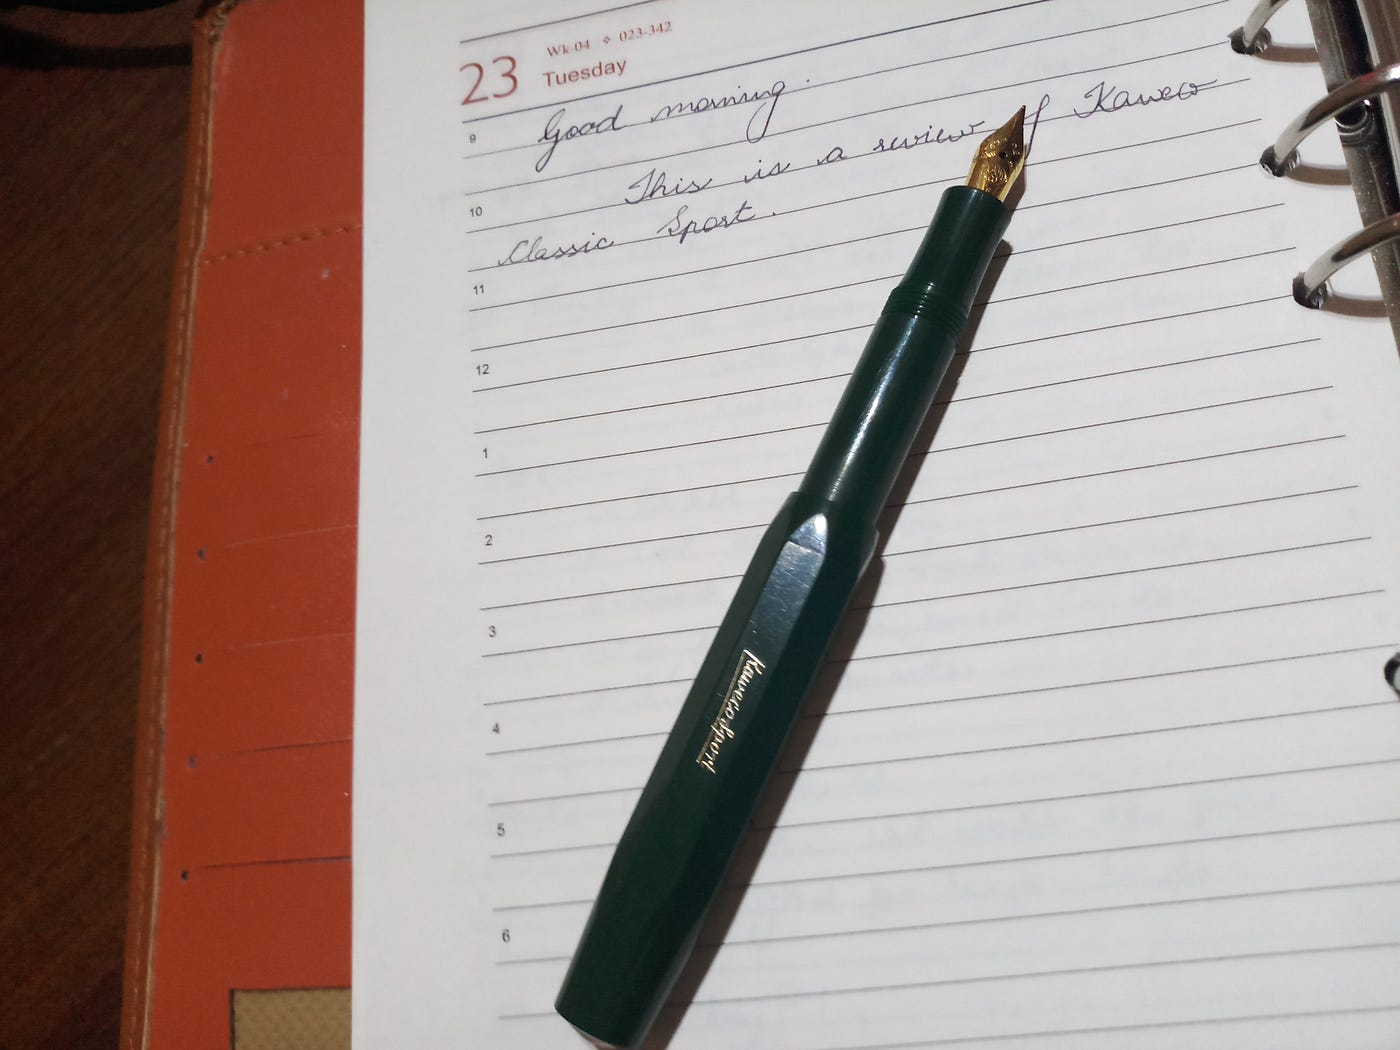 Kaweco Classic Sport Review. In this post, I shall be writing a